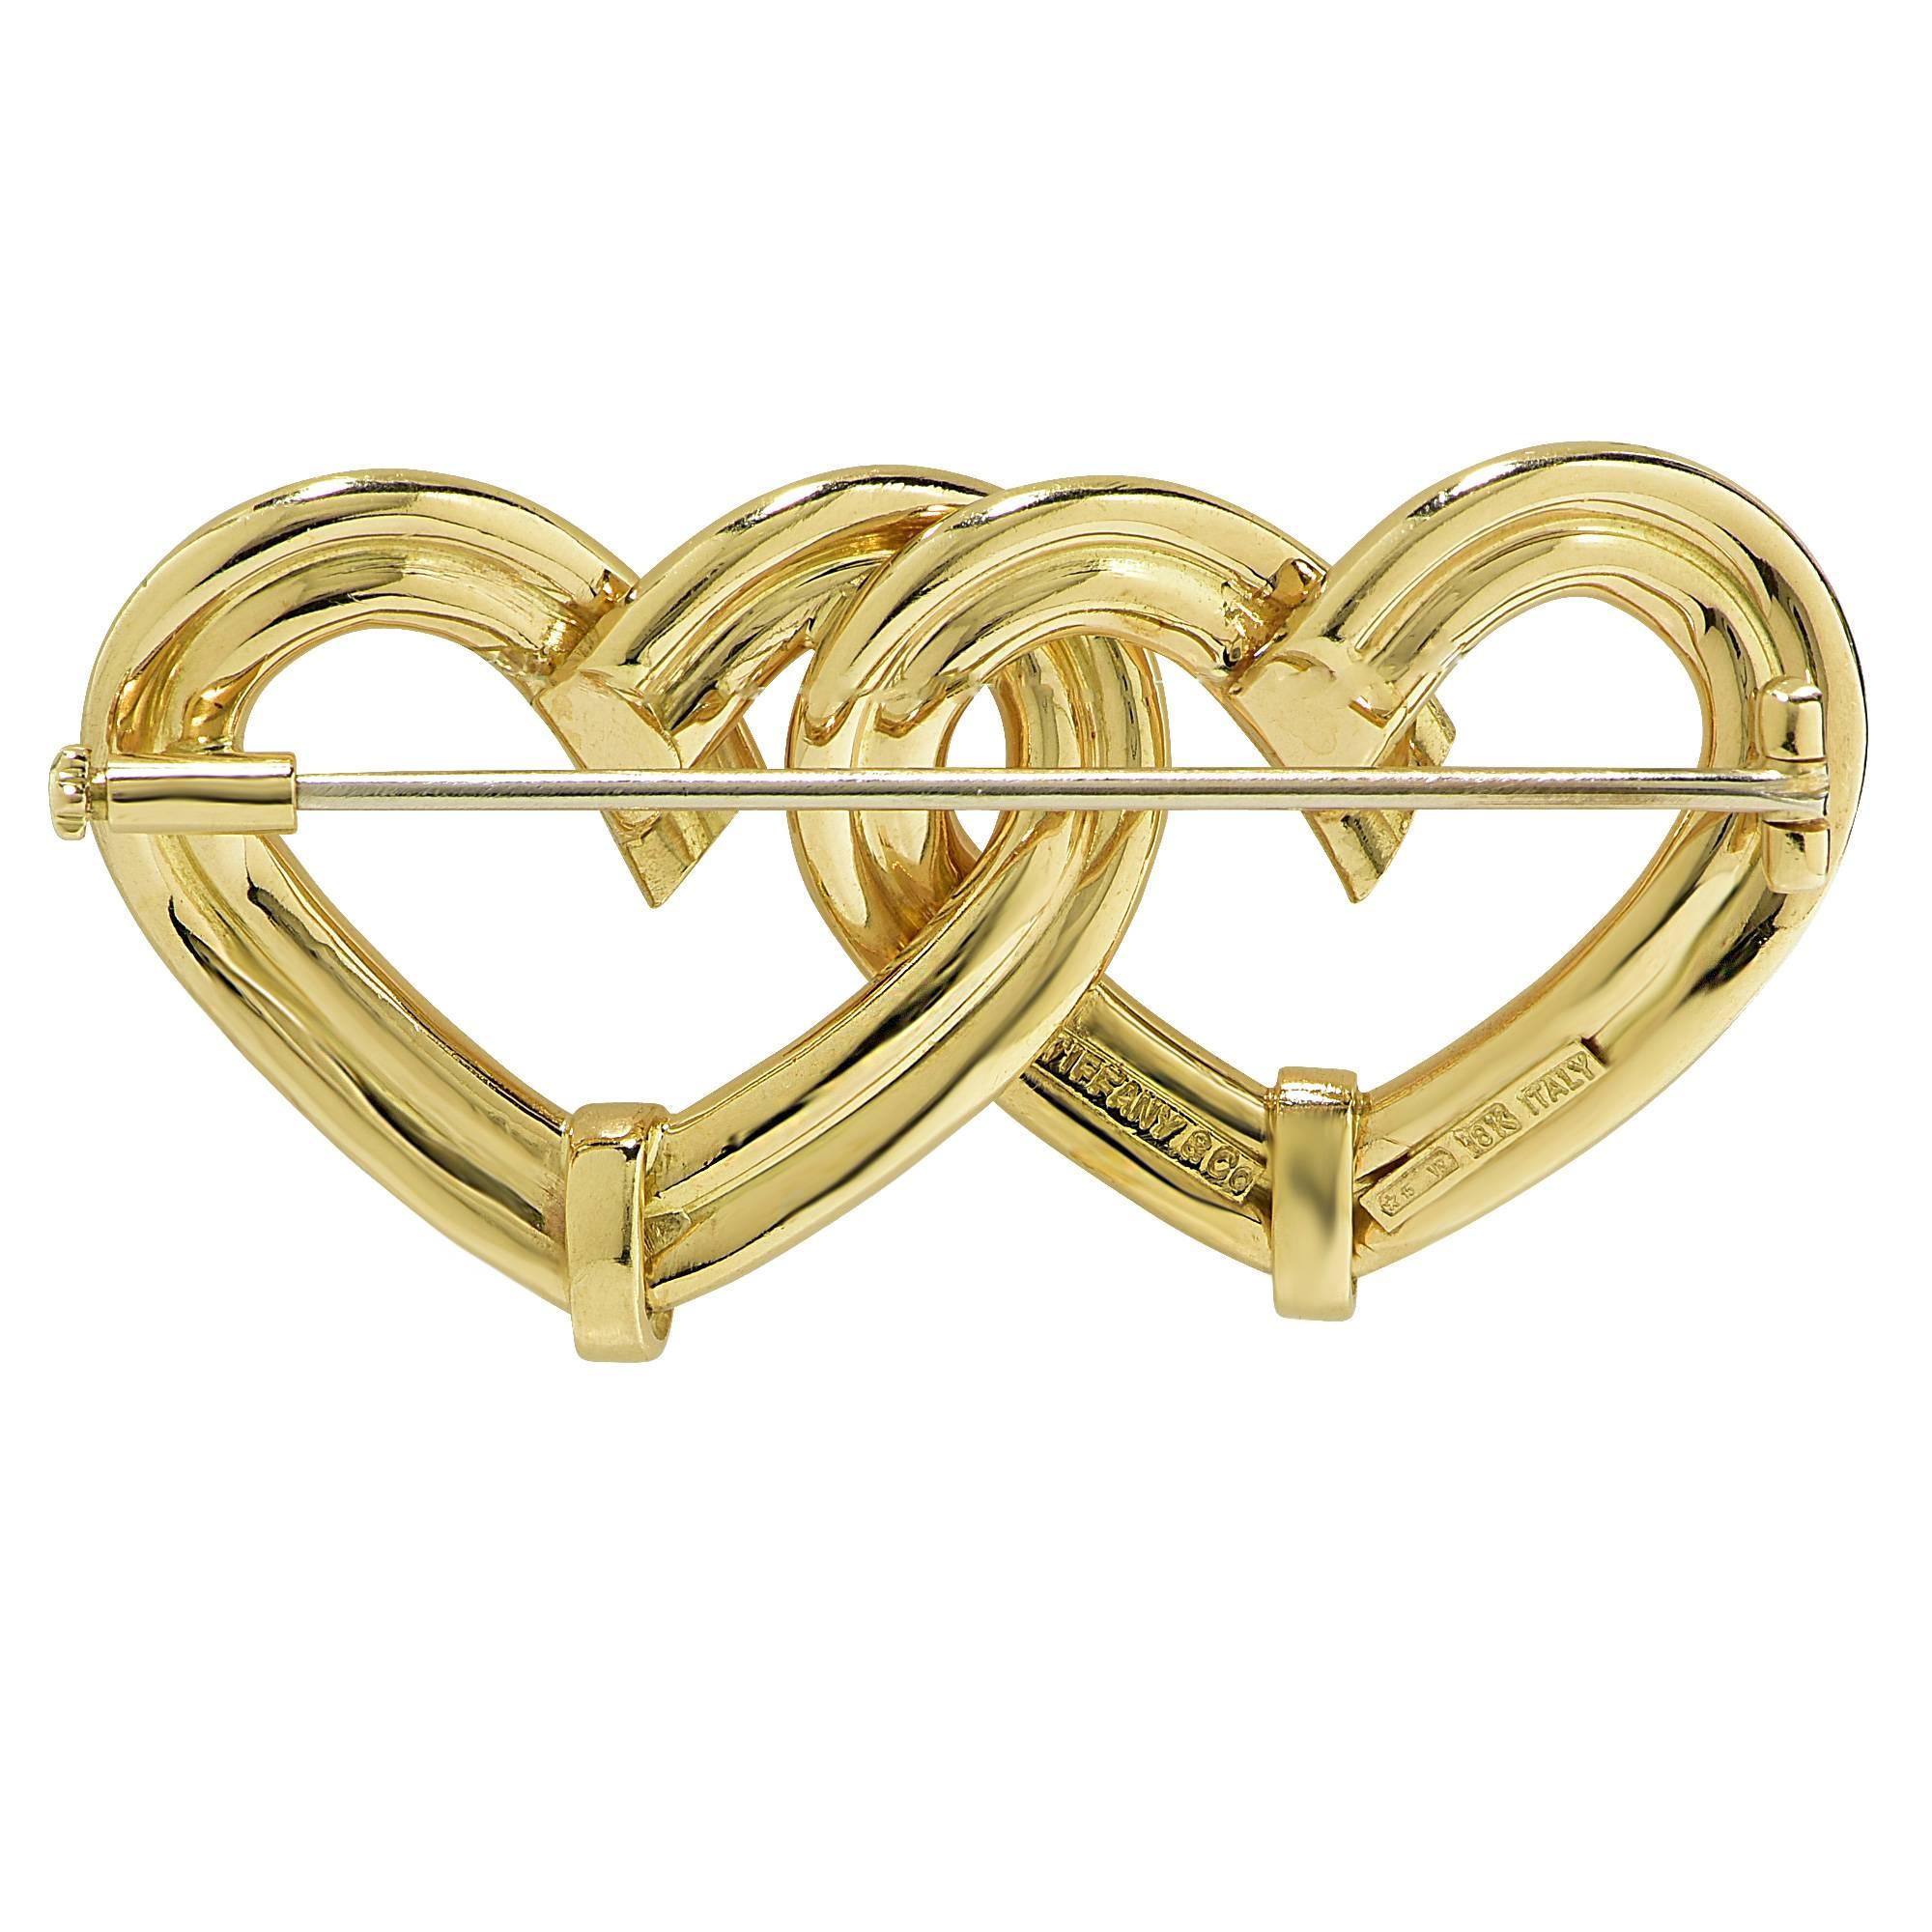 18k yellow Tiffany & Co. double heart brooch.

Metal weight: 13.68 grams

This brooch is accompanied by a retail appraisal performed by a GIA Graduate Gemologist.